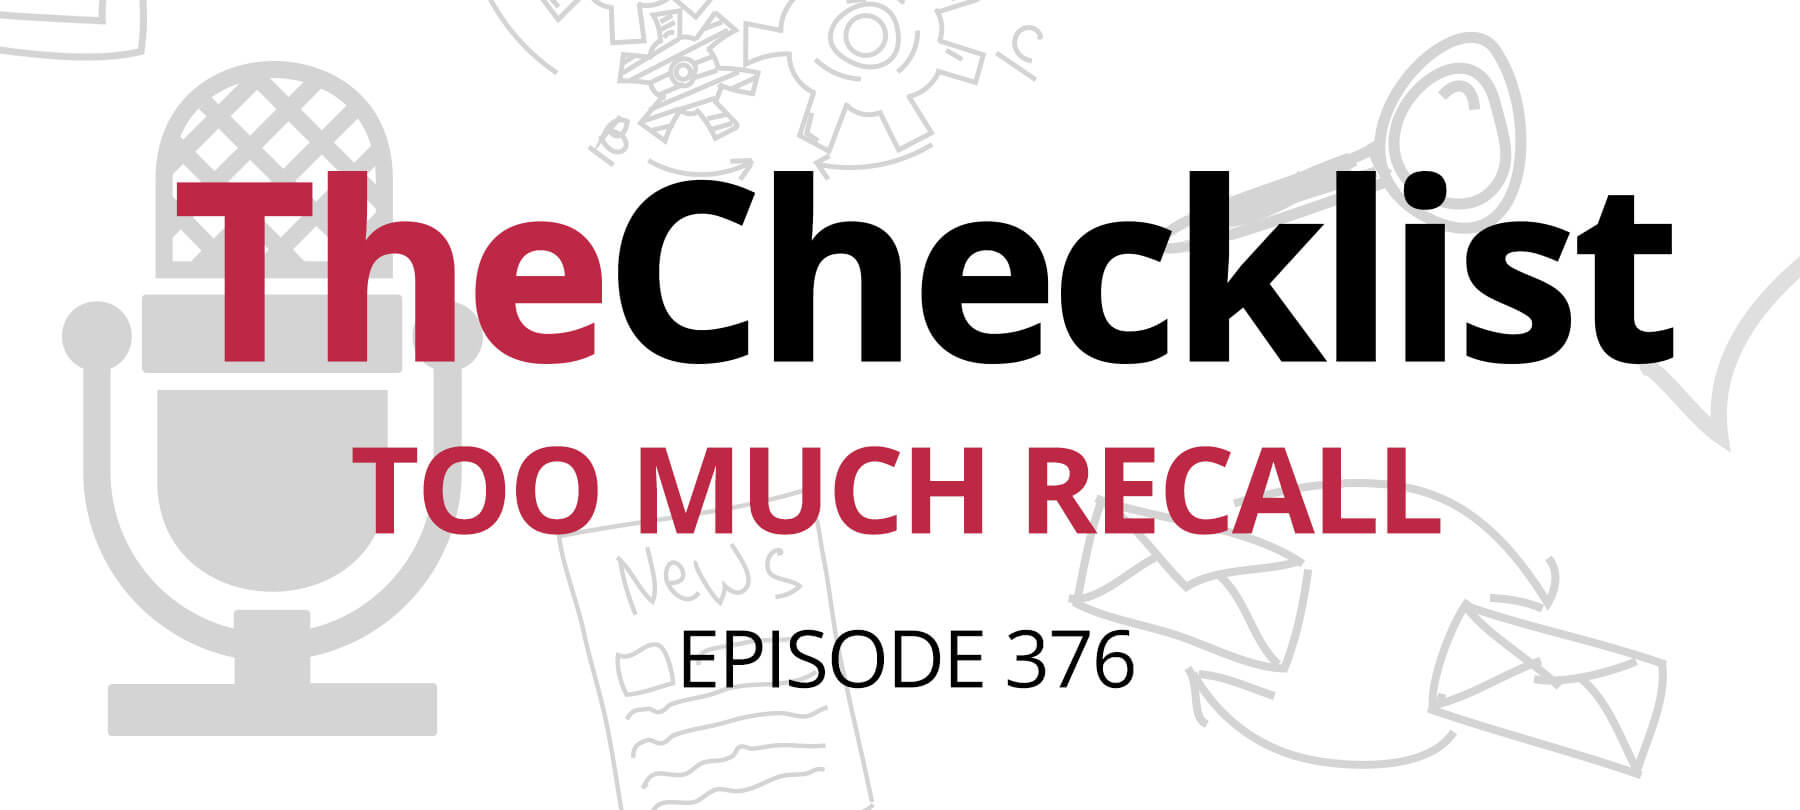 Checklist 376 title image: Too Much Recall